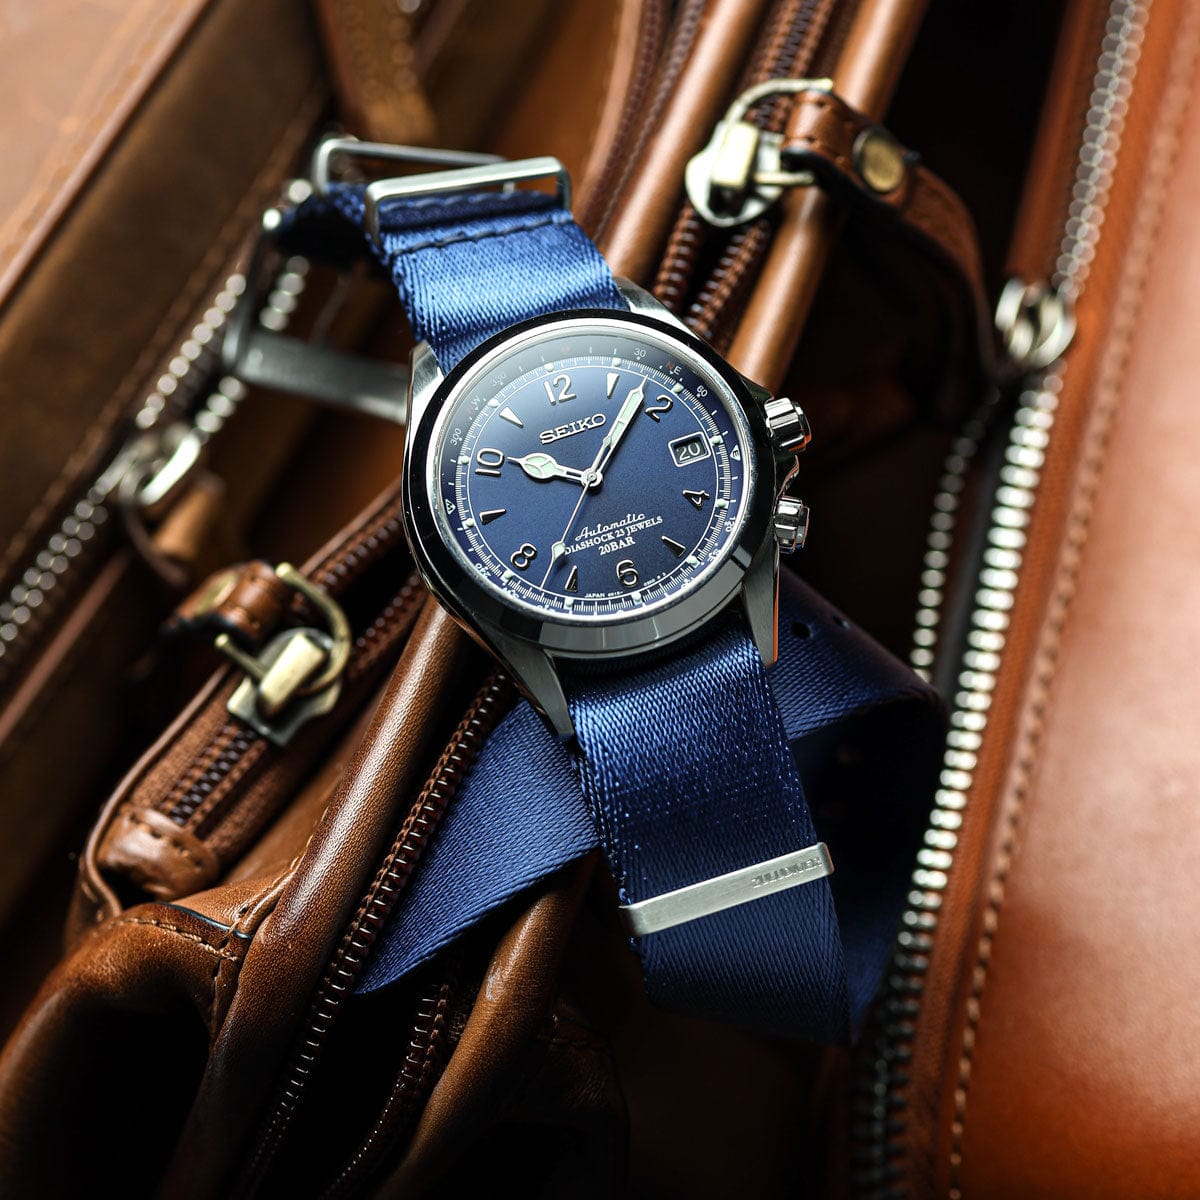 ZULUDIVER 1973 British Military Watch Strap: ARMOURED RECON - Navy Blue, Polished